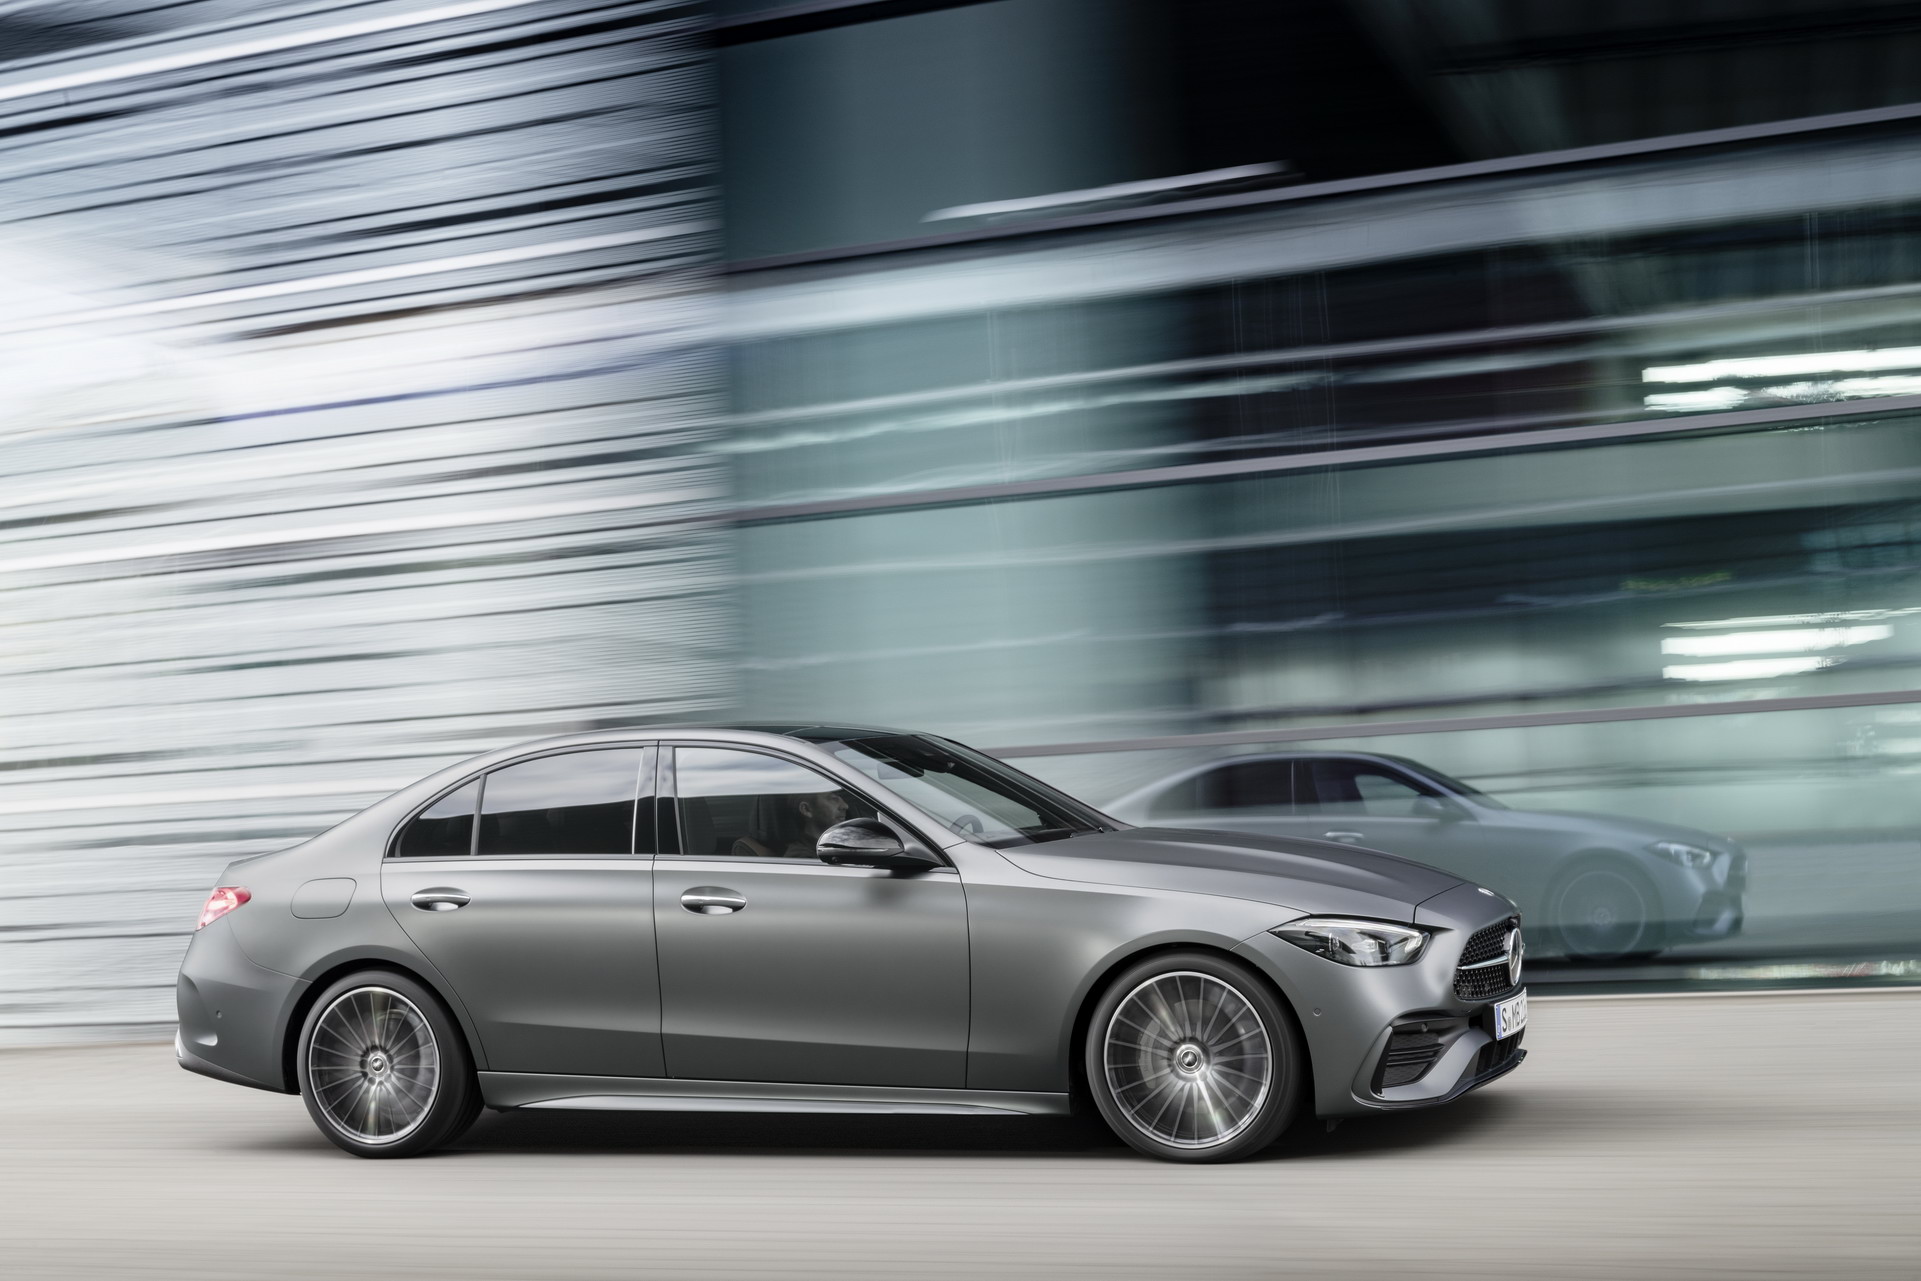 New 2022 Mercedes C-Class: All The International Engine Variants